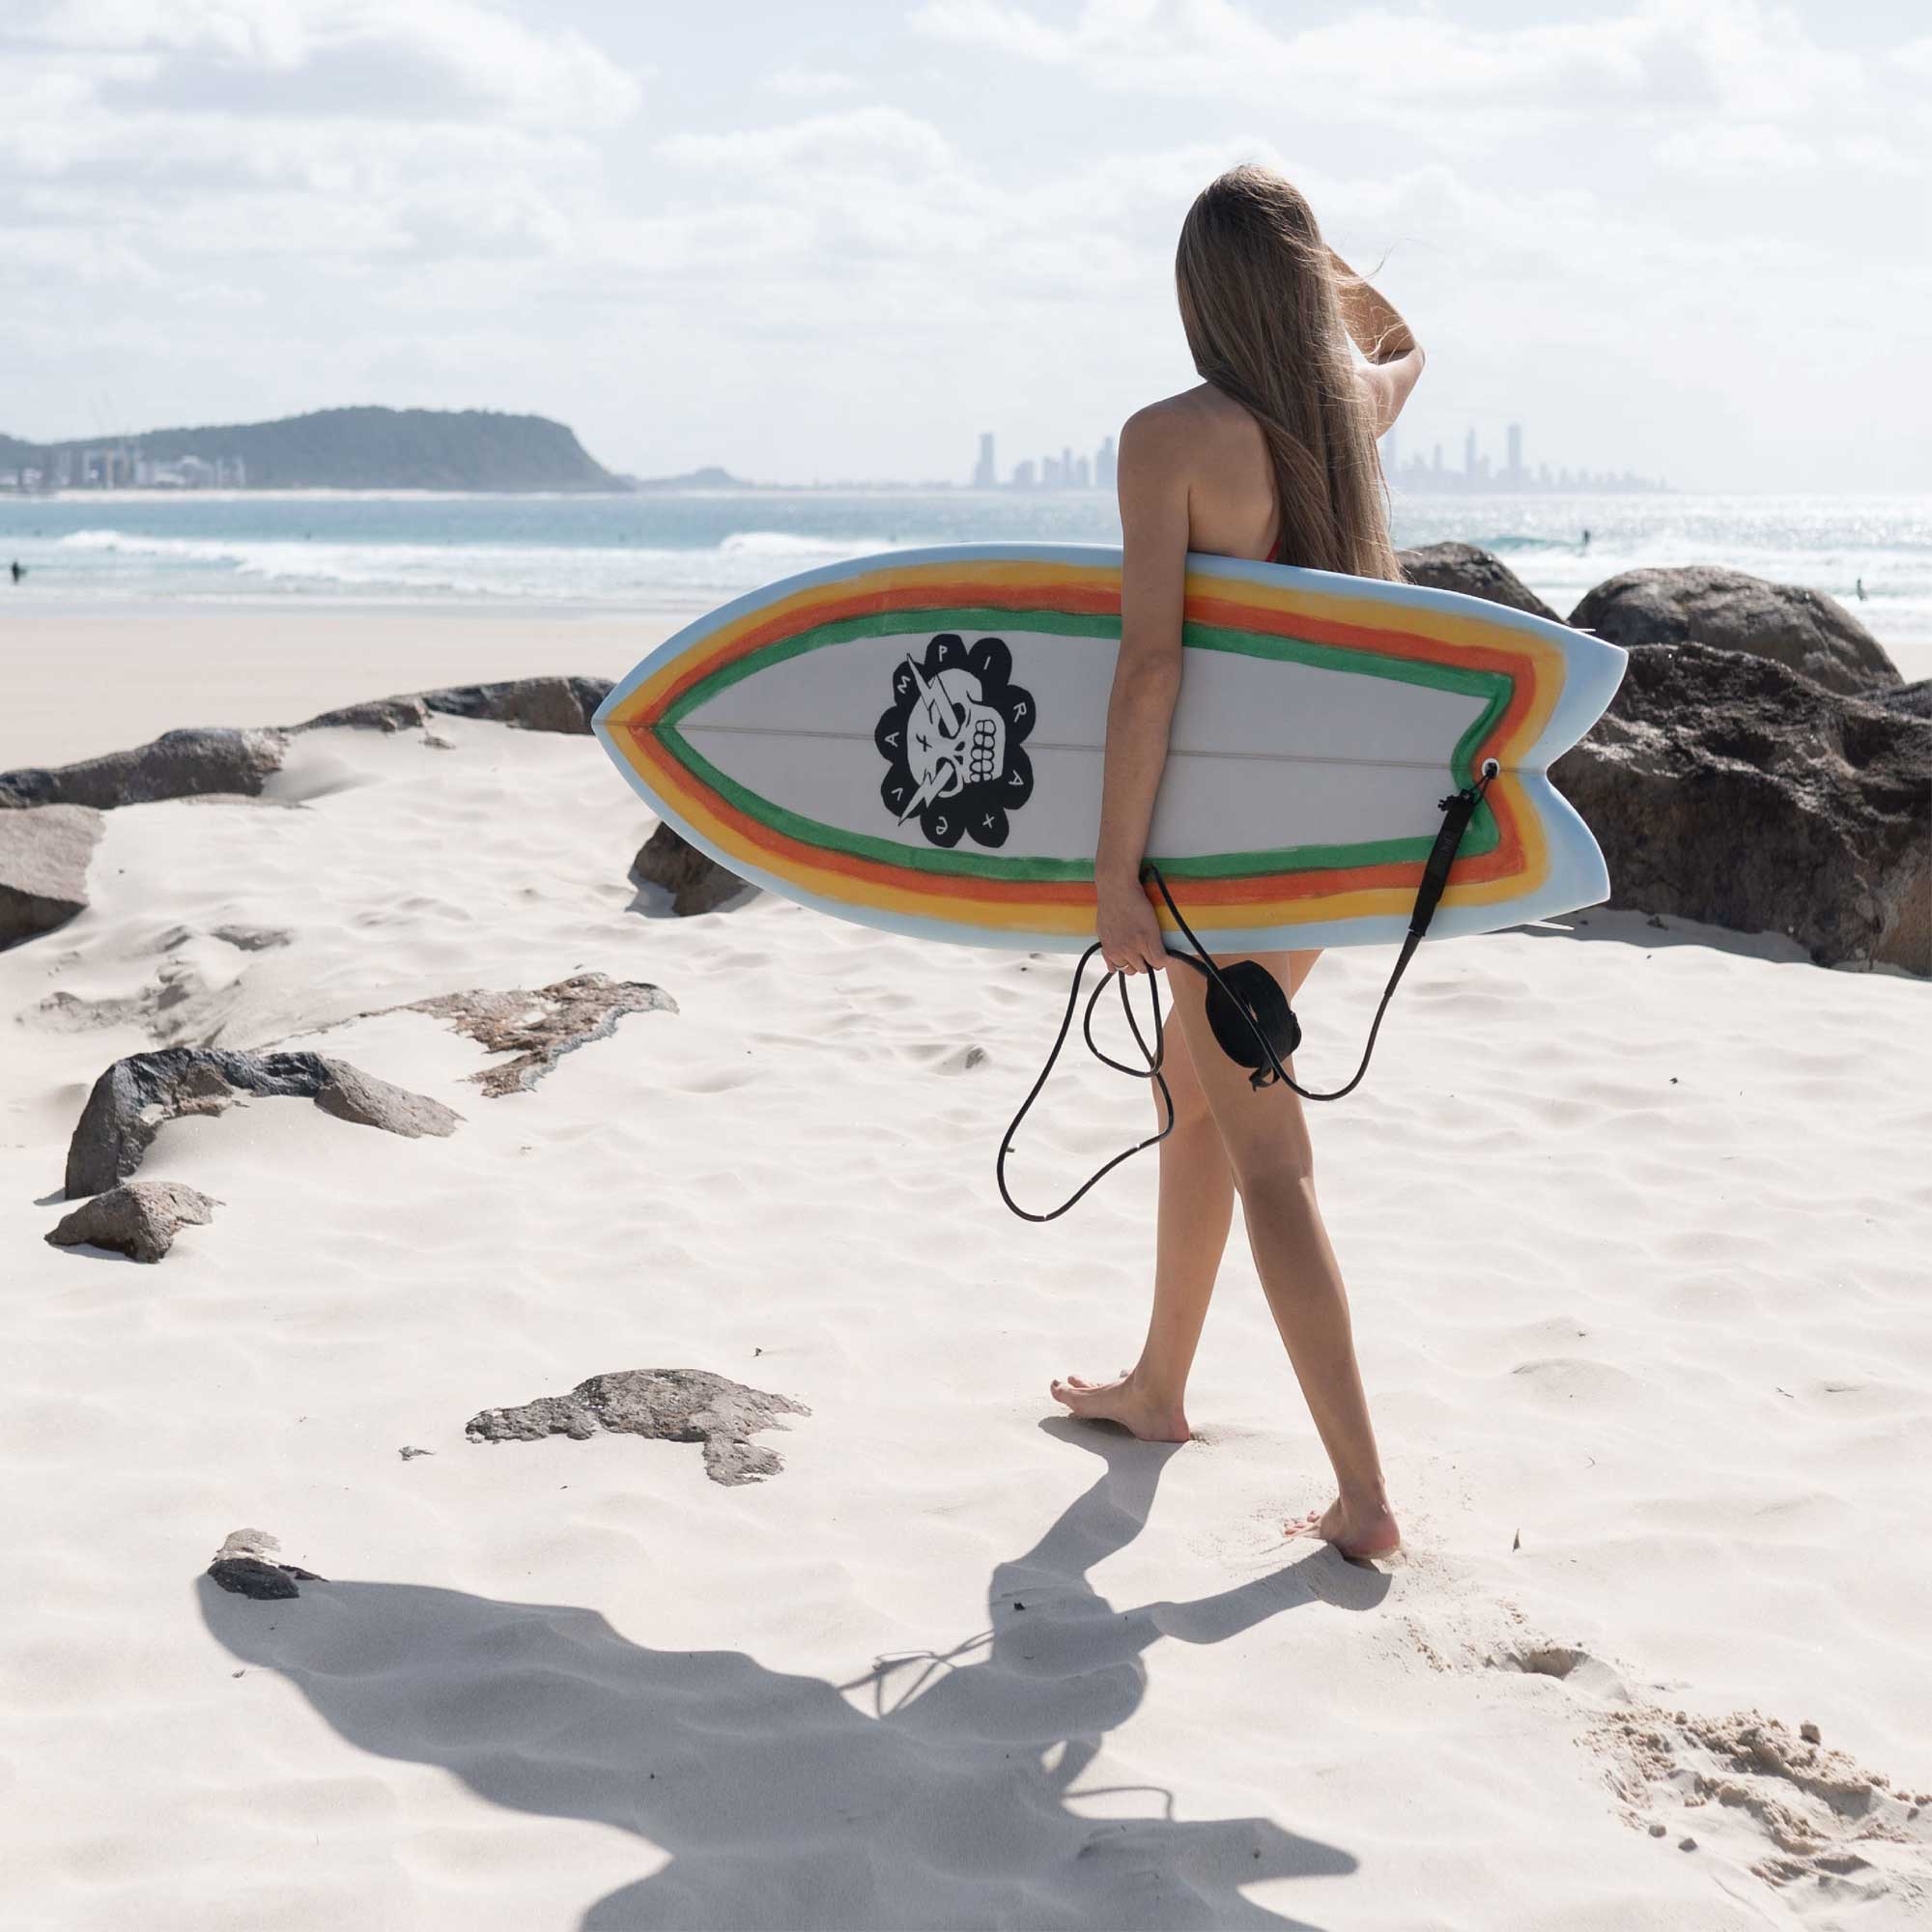 How To Repair A Ding In A Surfboard: 10 Steps